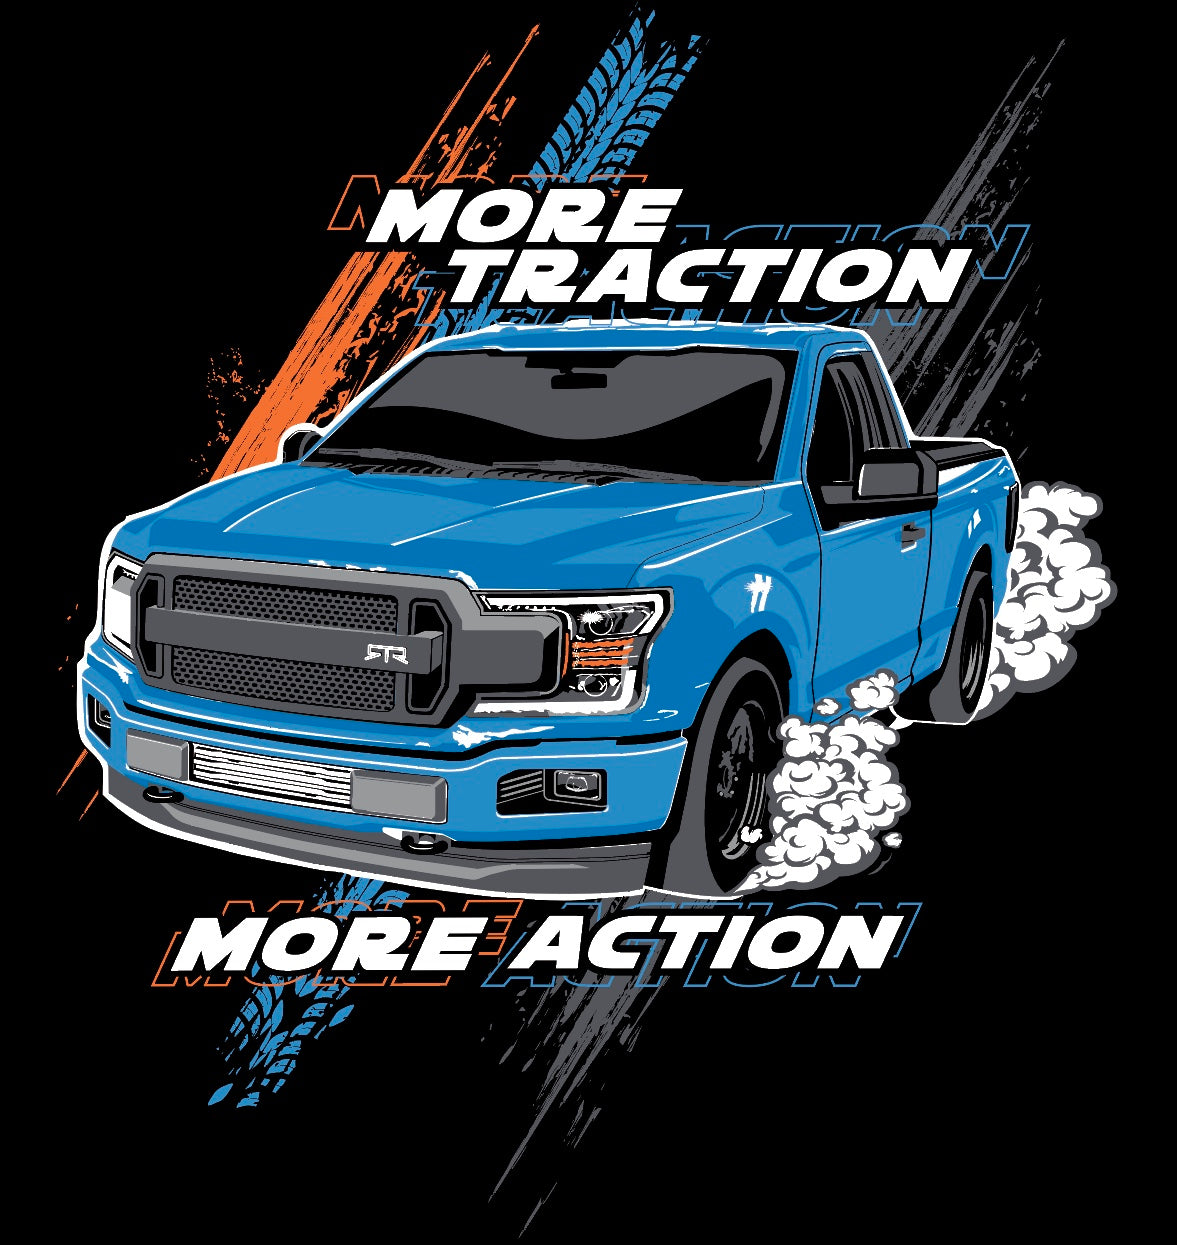 More Traction F150 Shirt